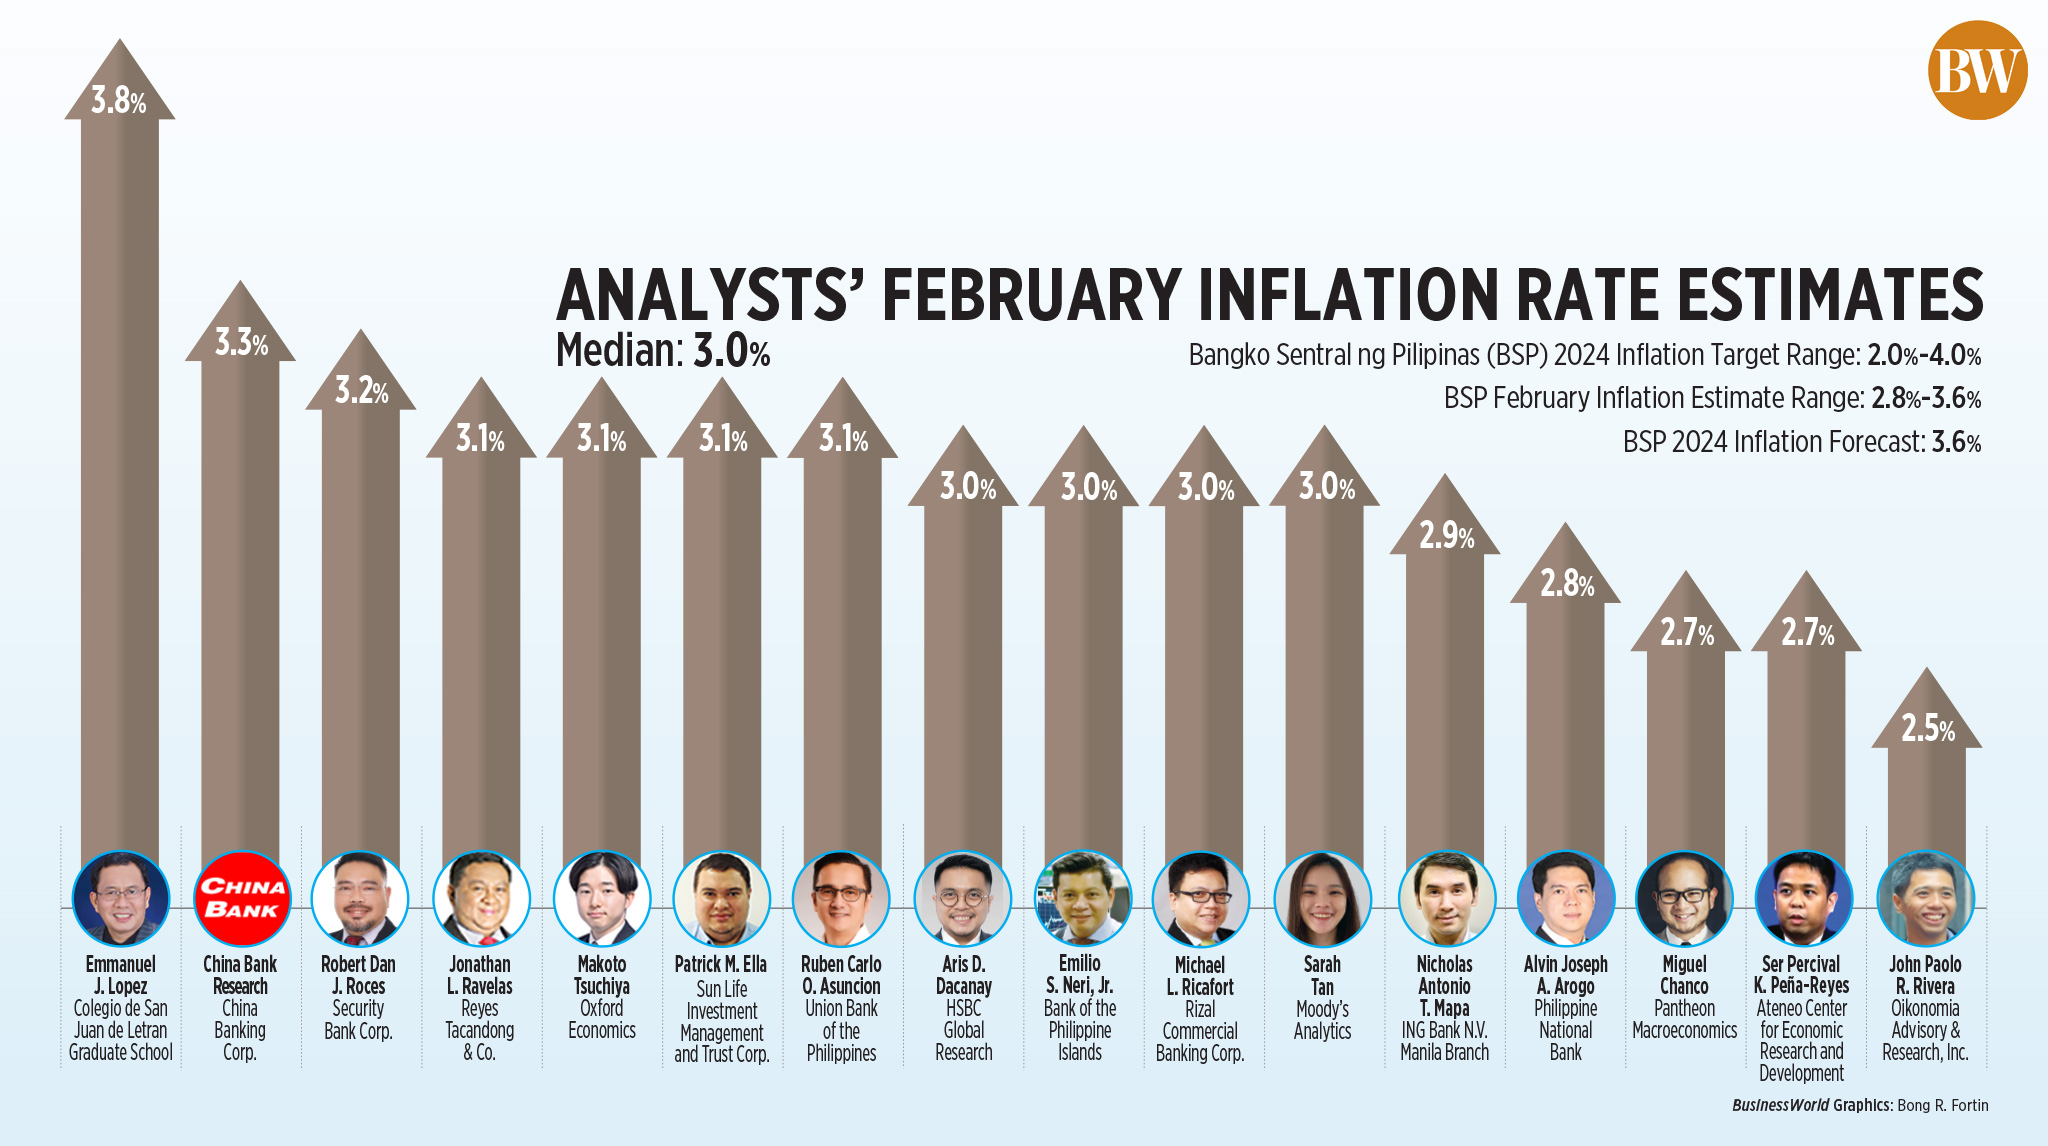 Analysts' February inflation rate estimates